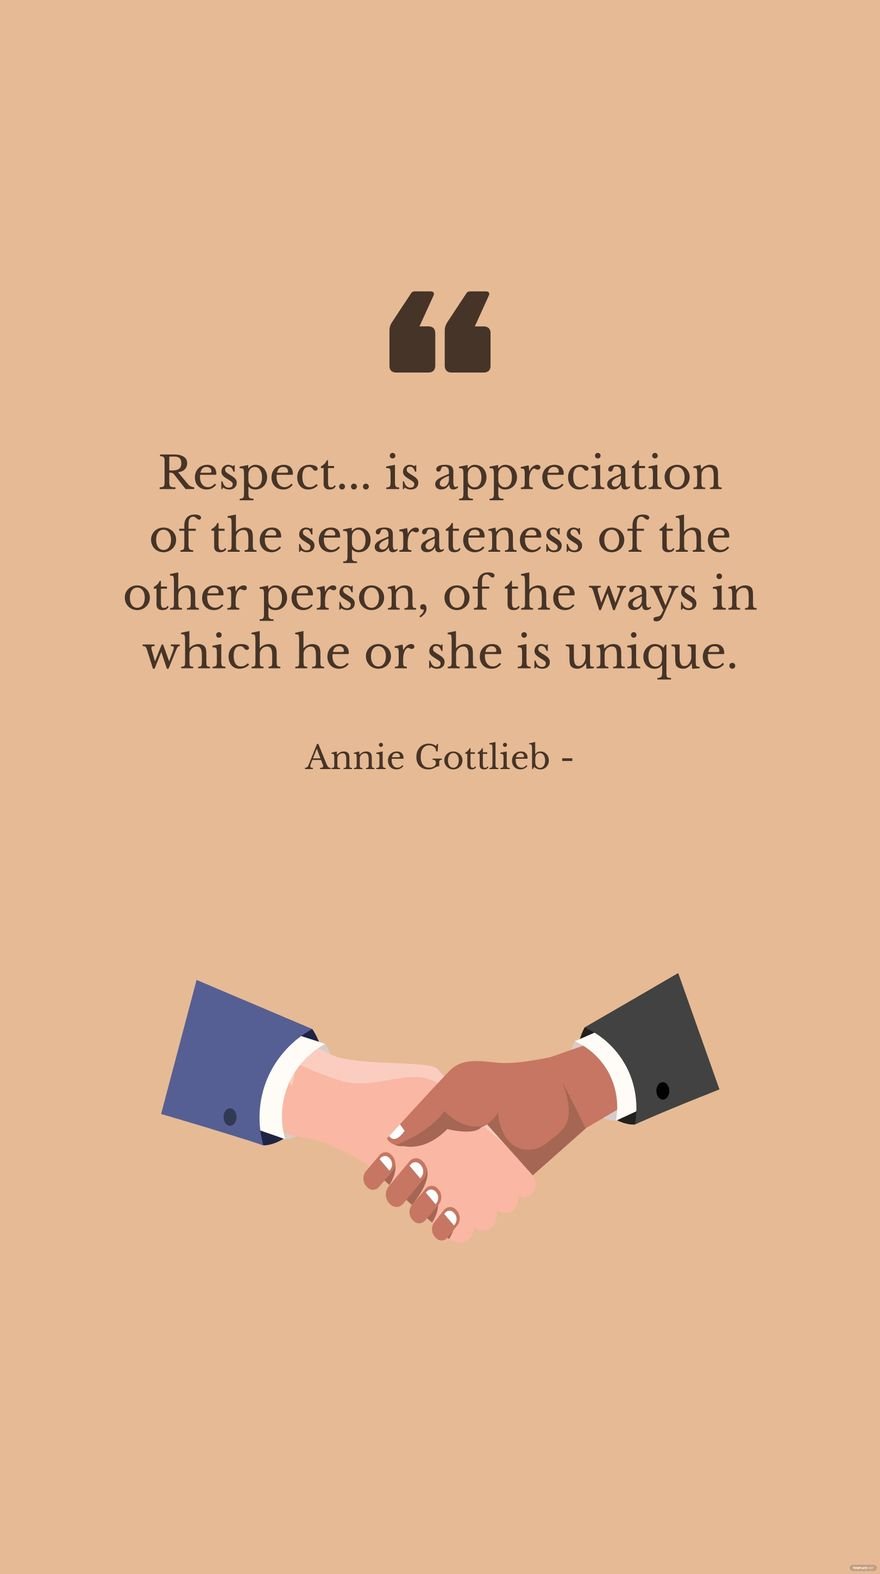 Annie Gottlieb - Respect... is appreciation of the separateness of the other person, of the ways in which he or she is unique. in JPG